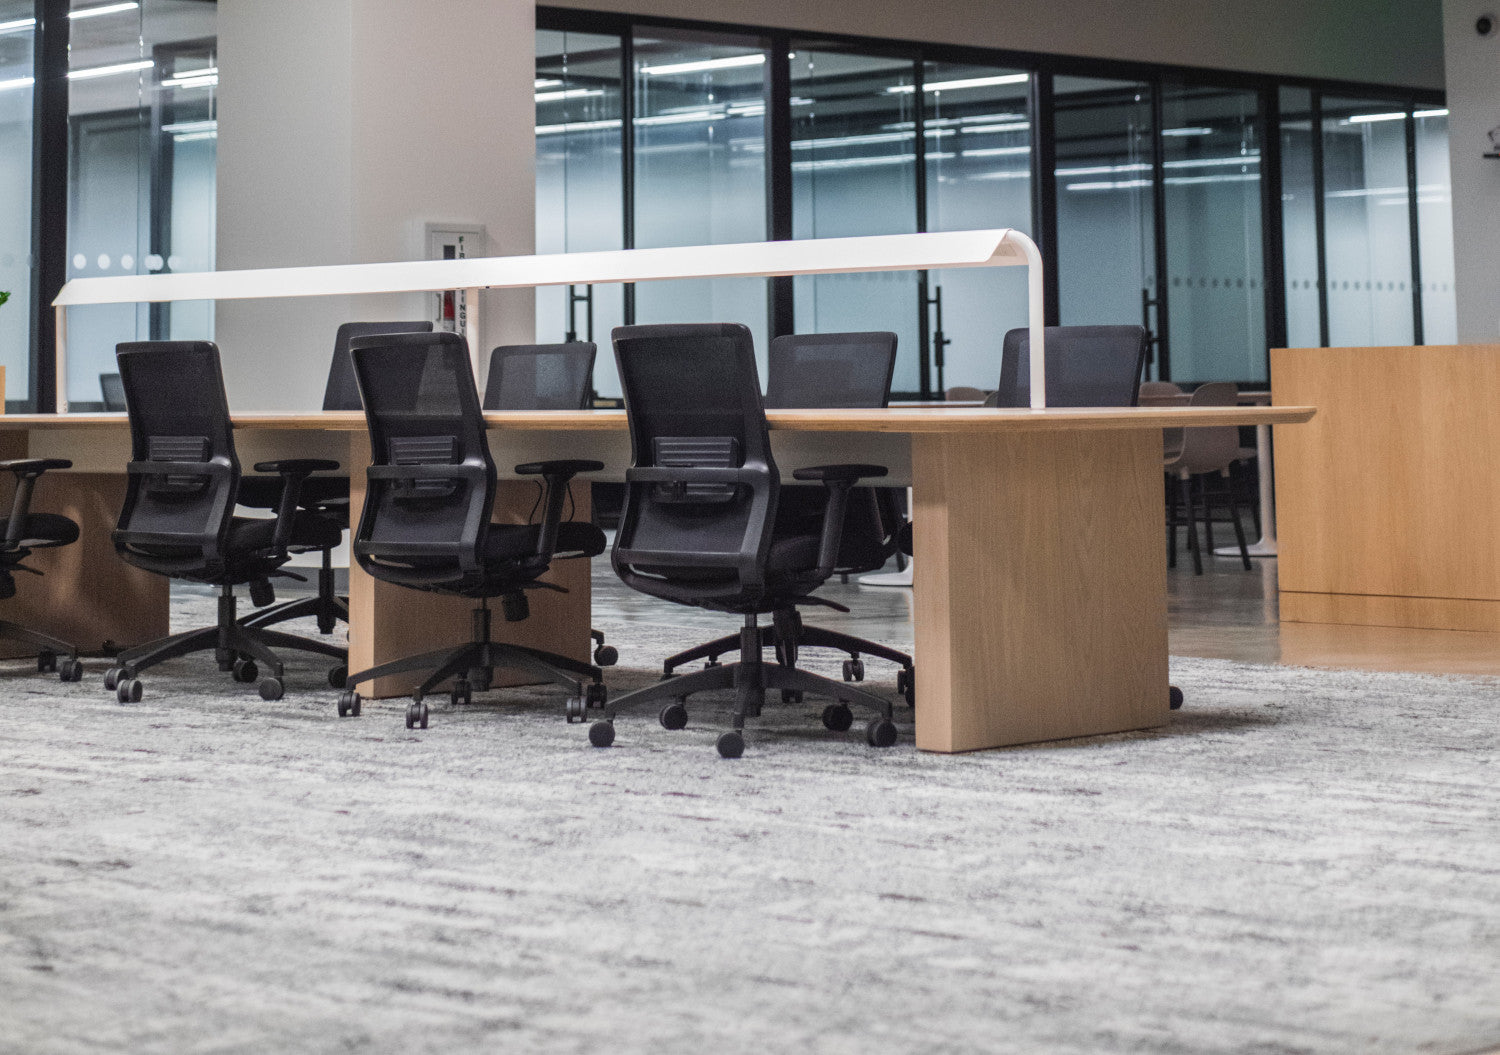 Office Chair vs Ergonomic Chair: What Is The Difference?